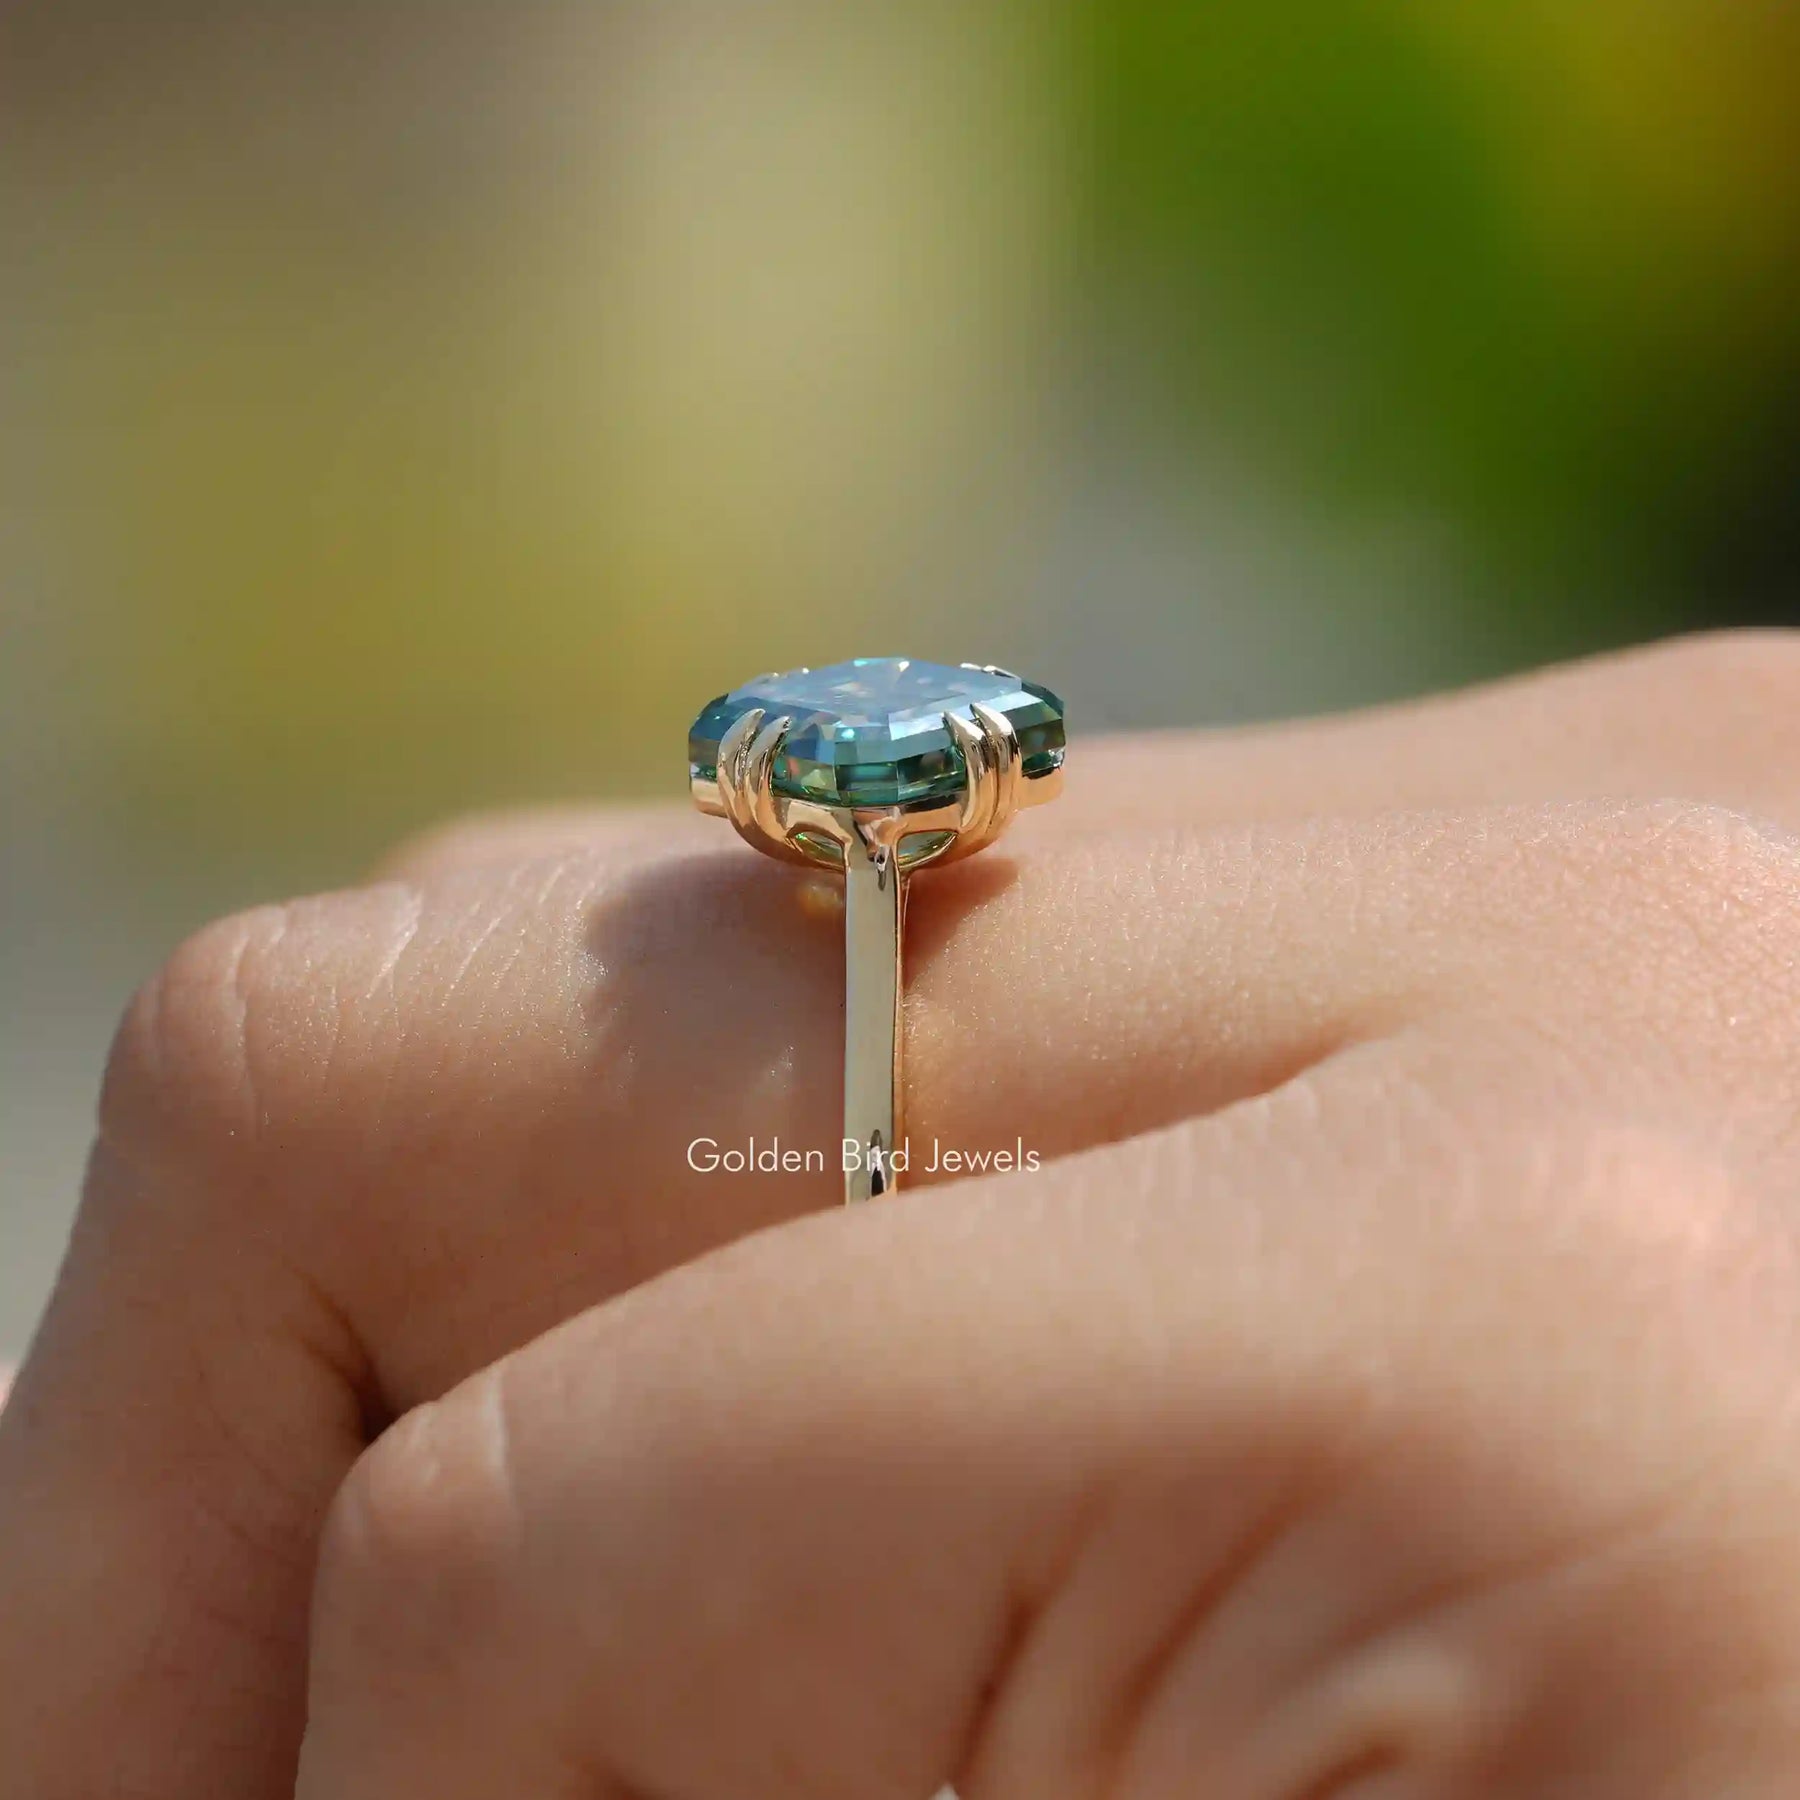 [Fancy Cut Moissanite Solitaire Ring Made Of Double Prongs & Yellow Gold]-[Golden Bird Jewels]